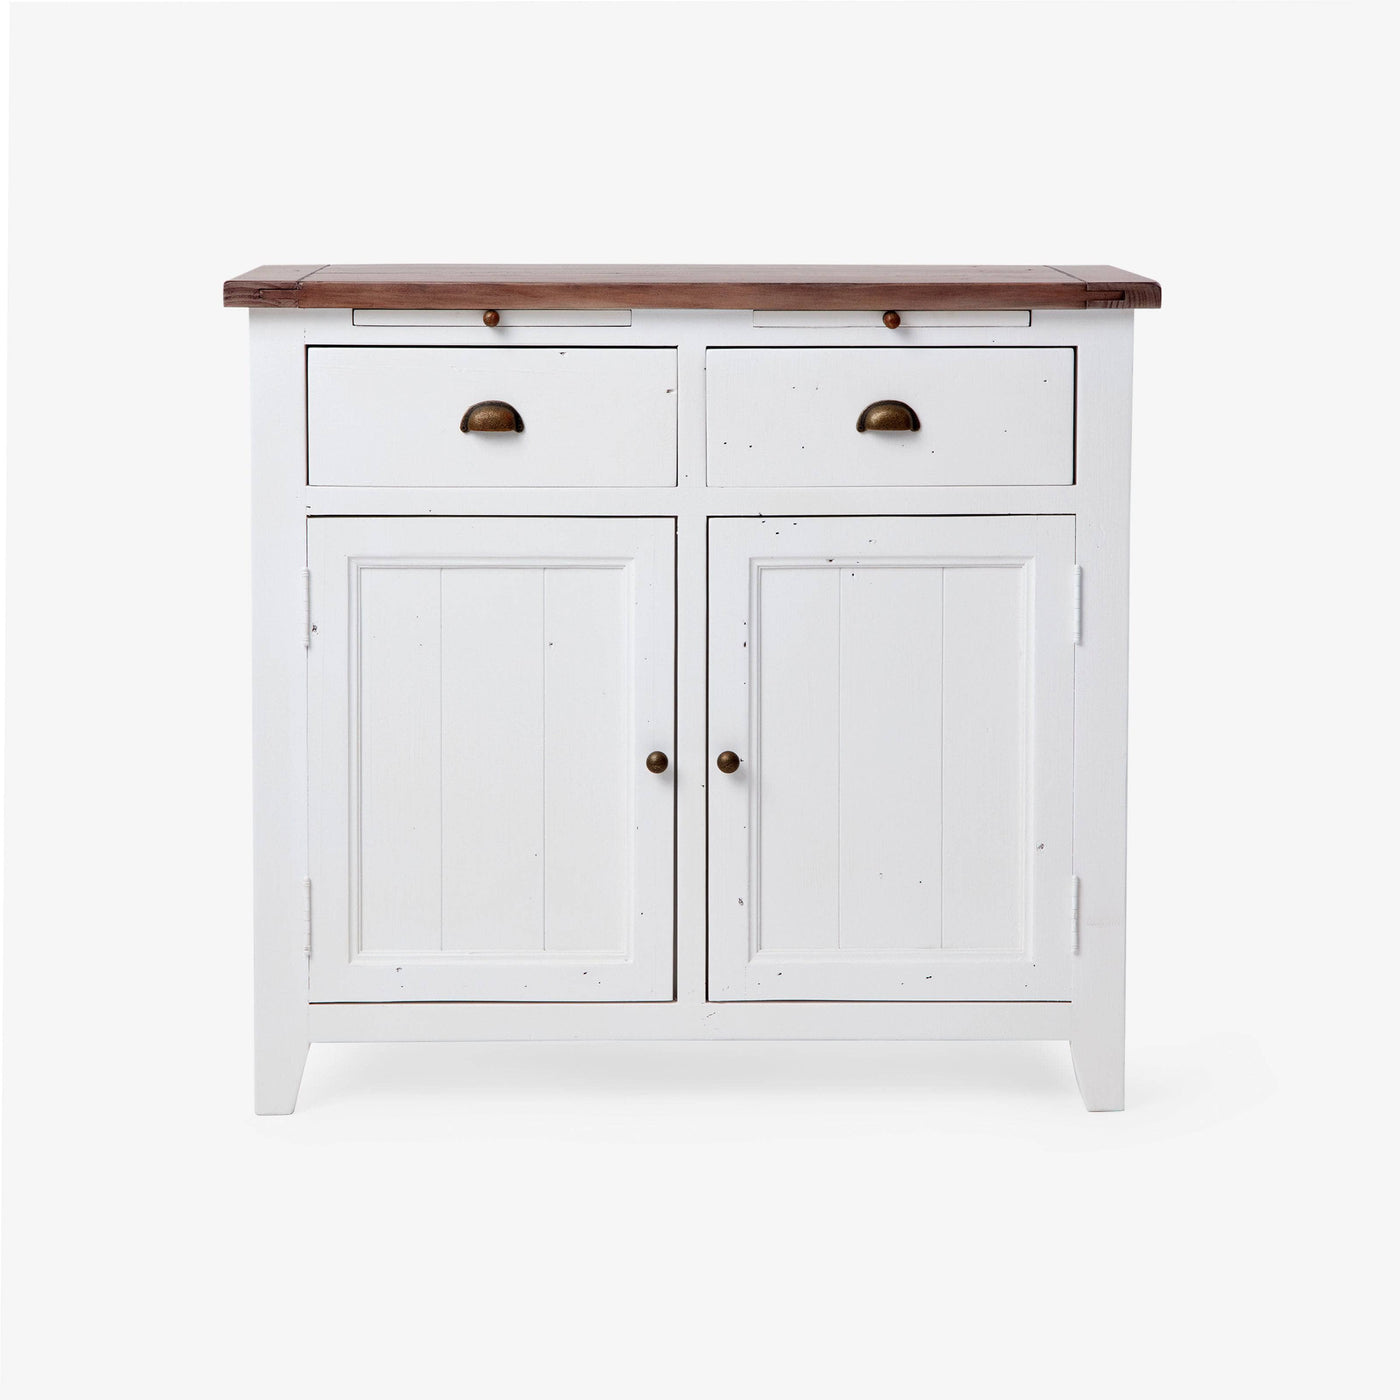 Atwood Narrow Sideboard, White Sideboards sazy.com